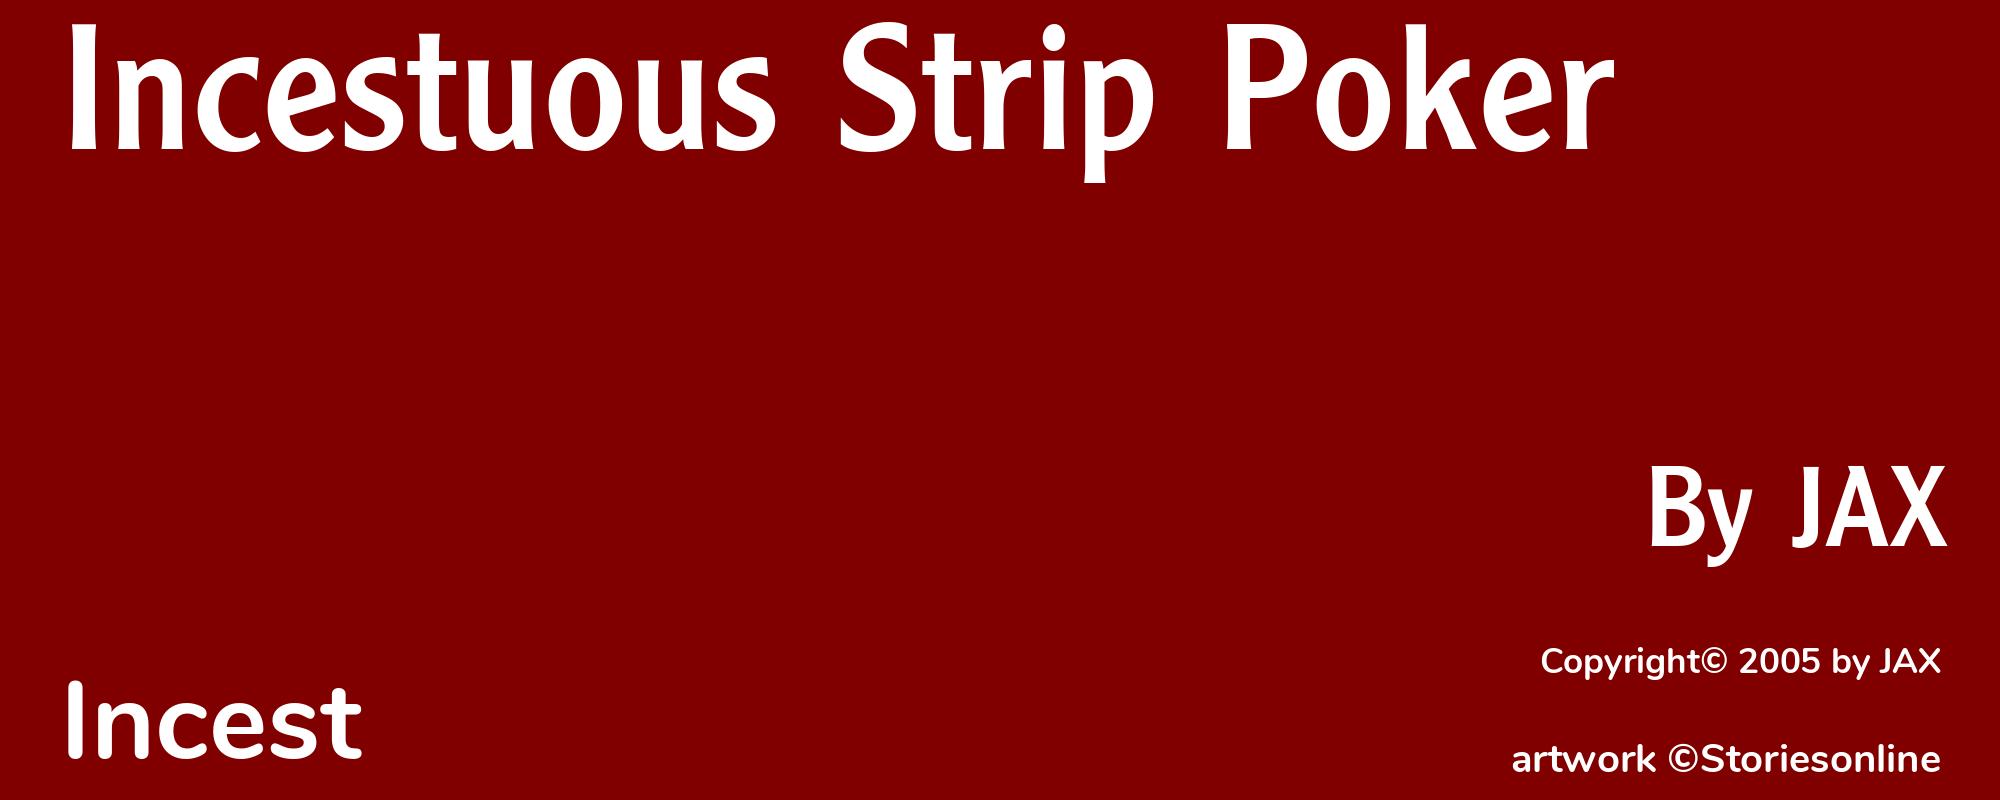 Incestuous Strip Poker - Cover